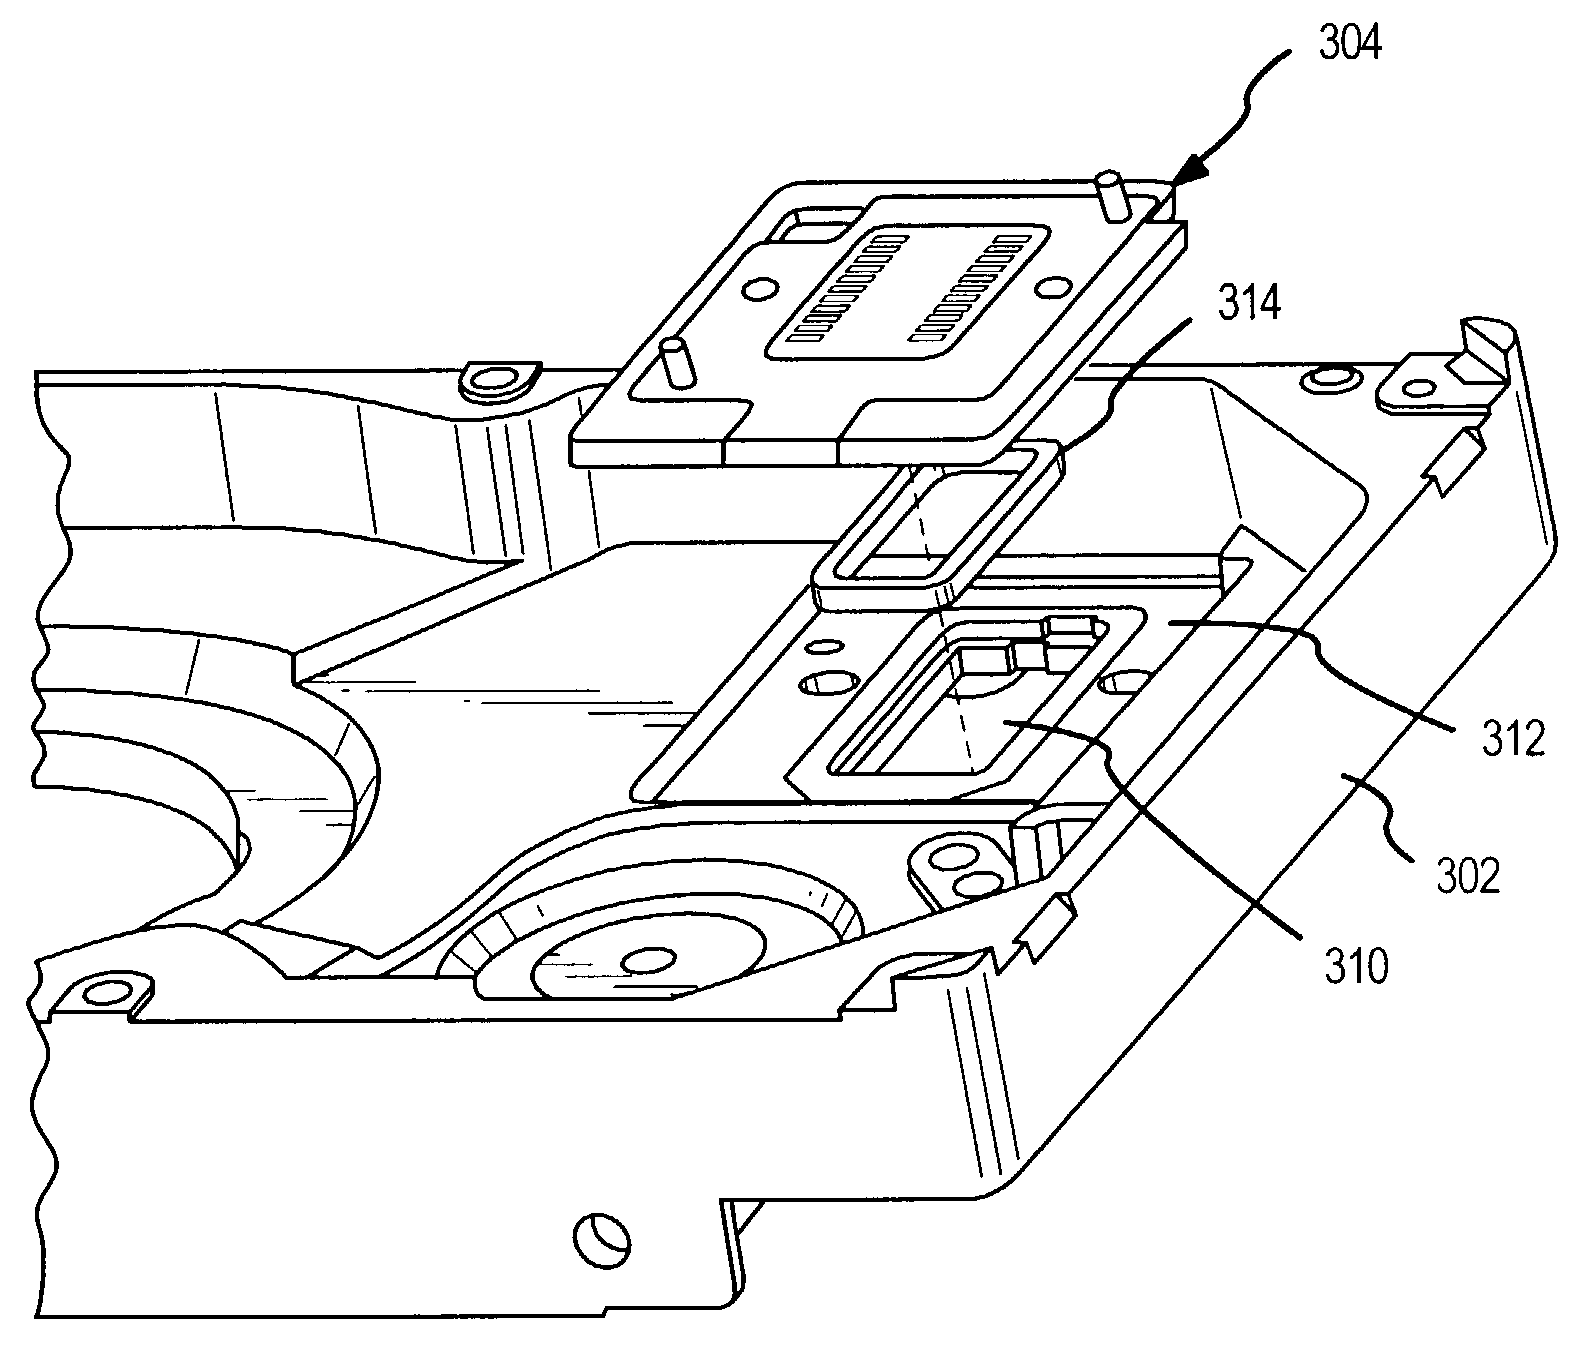 Bulkhead connector for low leak rate disc drives